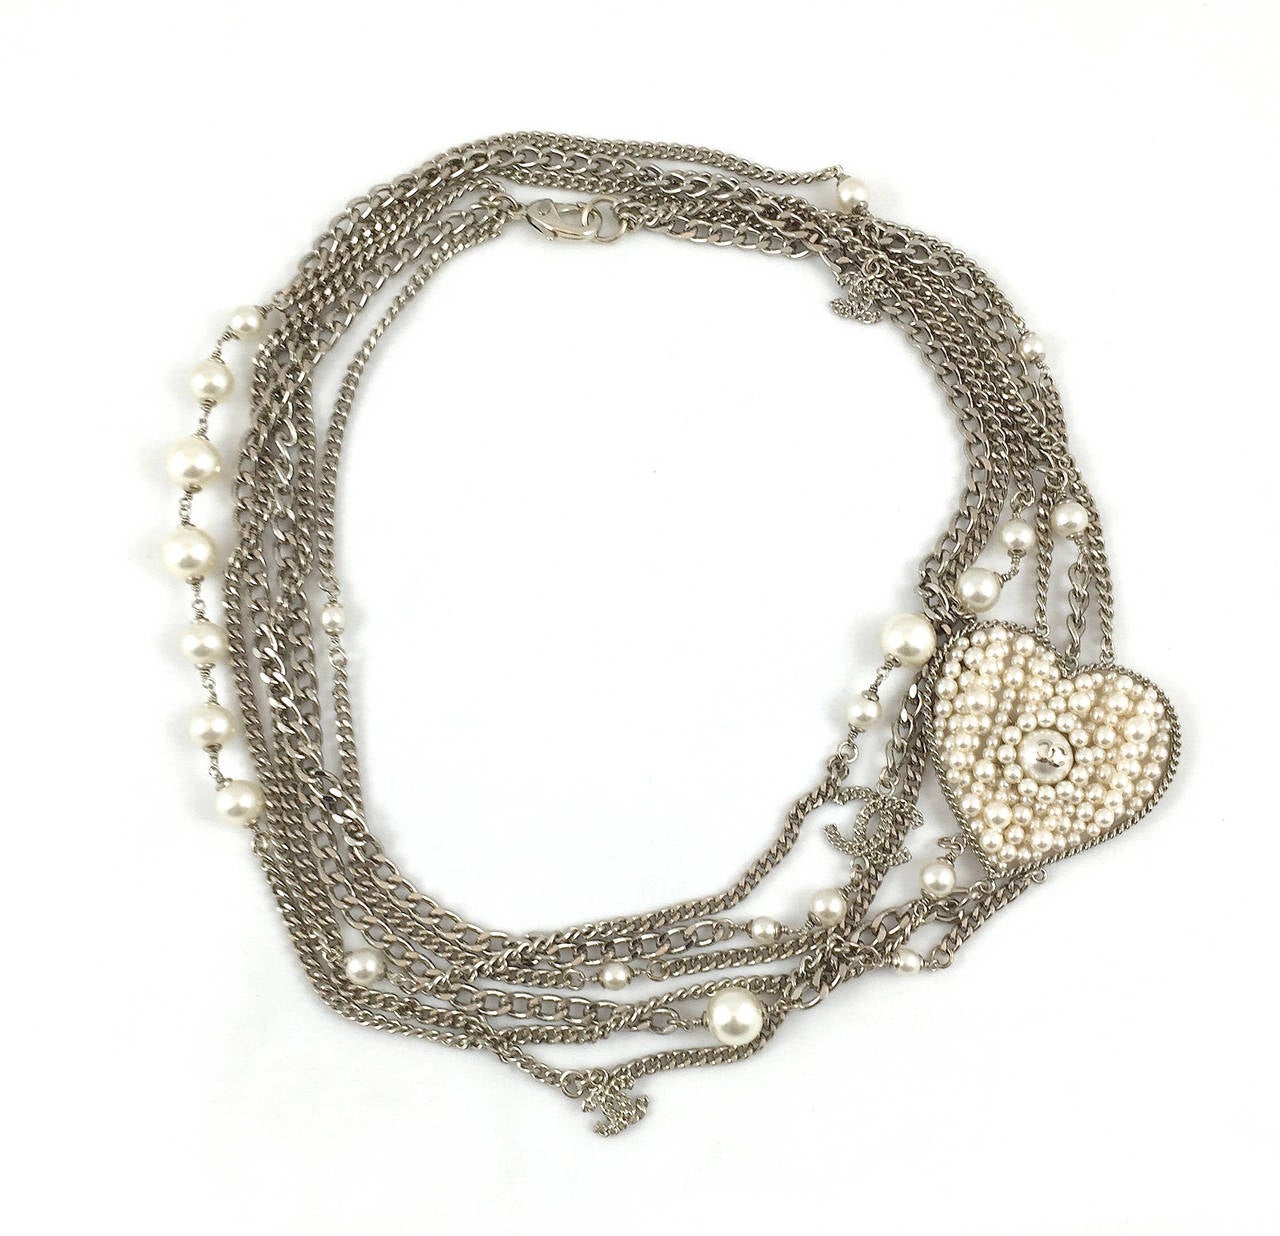 Stunning Chanel faux pearl silver-tone multi-chain sautoir extra long necklace with hand strung pearls encased in a large heart pendant. This rare, elegant necklace is from the Fall 2006 Collection. 

Measurements:
Length 48